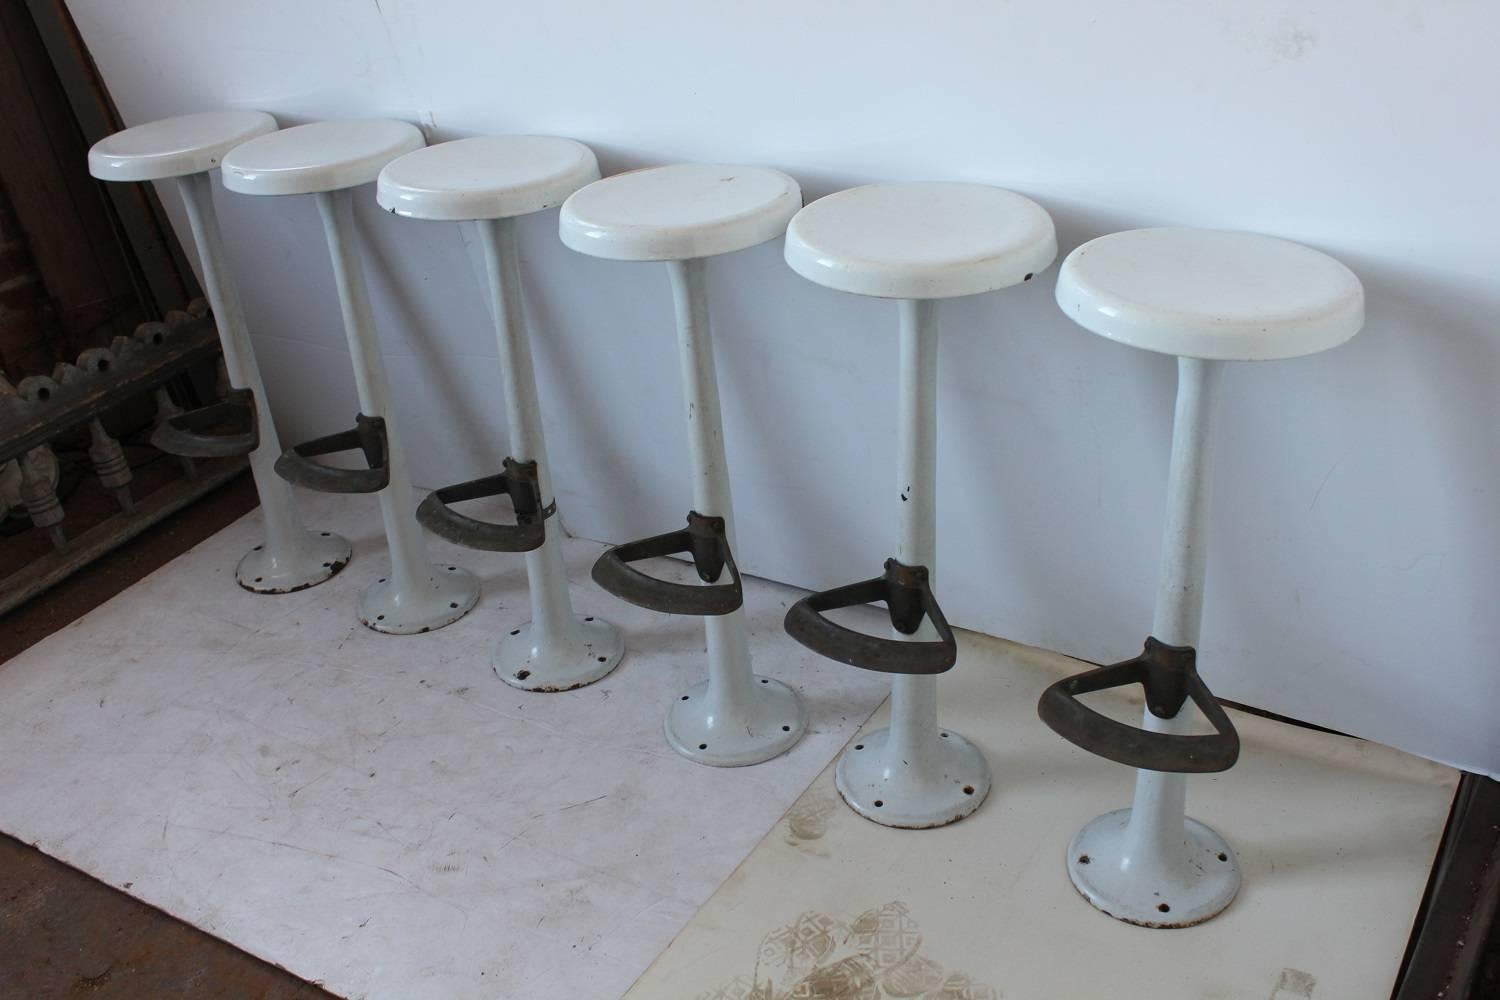 Antique soda fountain porcelain bar stools with original foot rests. They could be mounted to floor. Listed price is for one stool. Footrest H 12